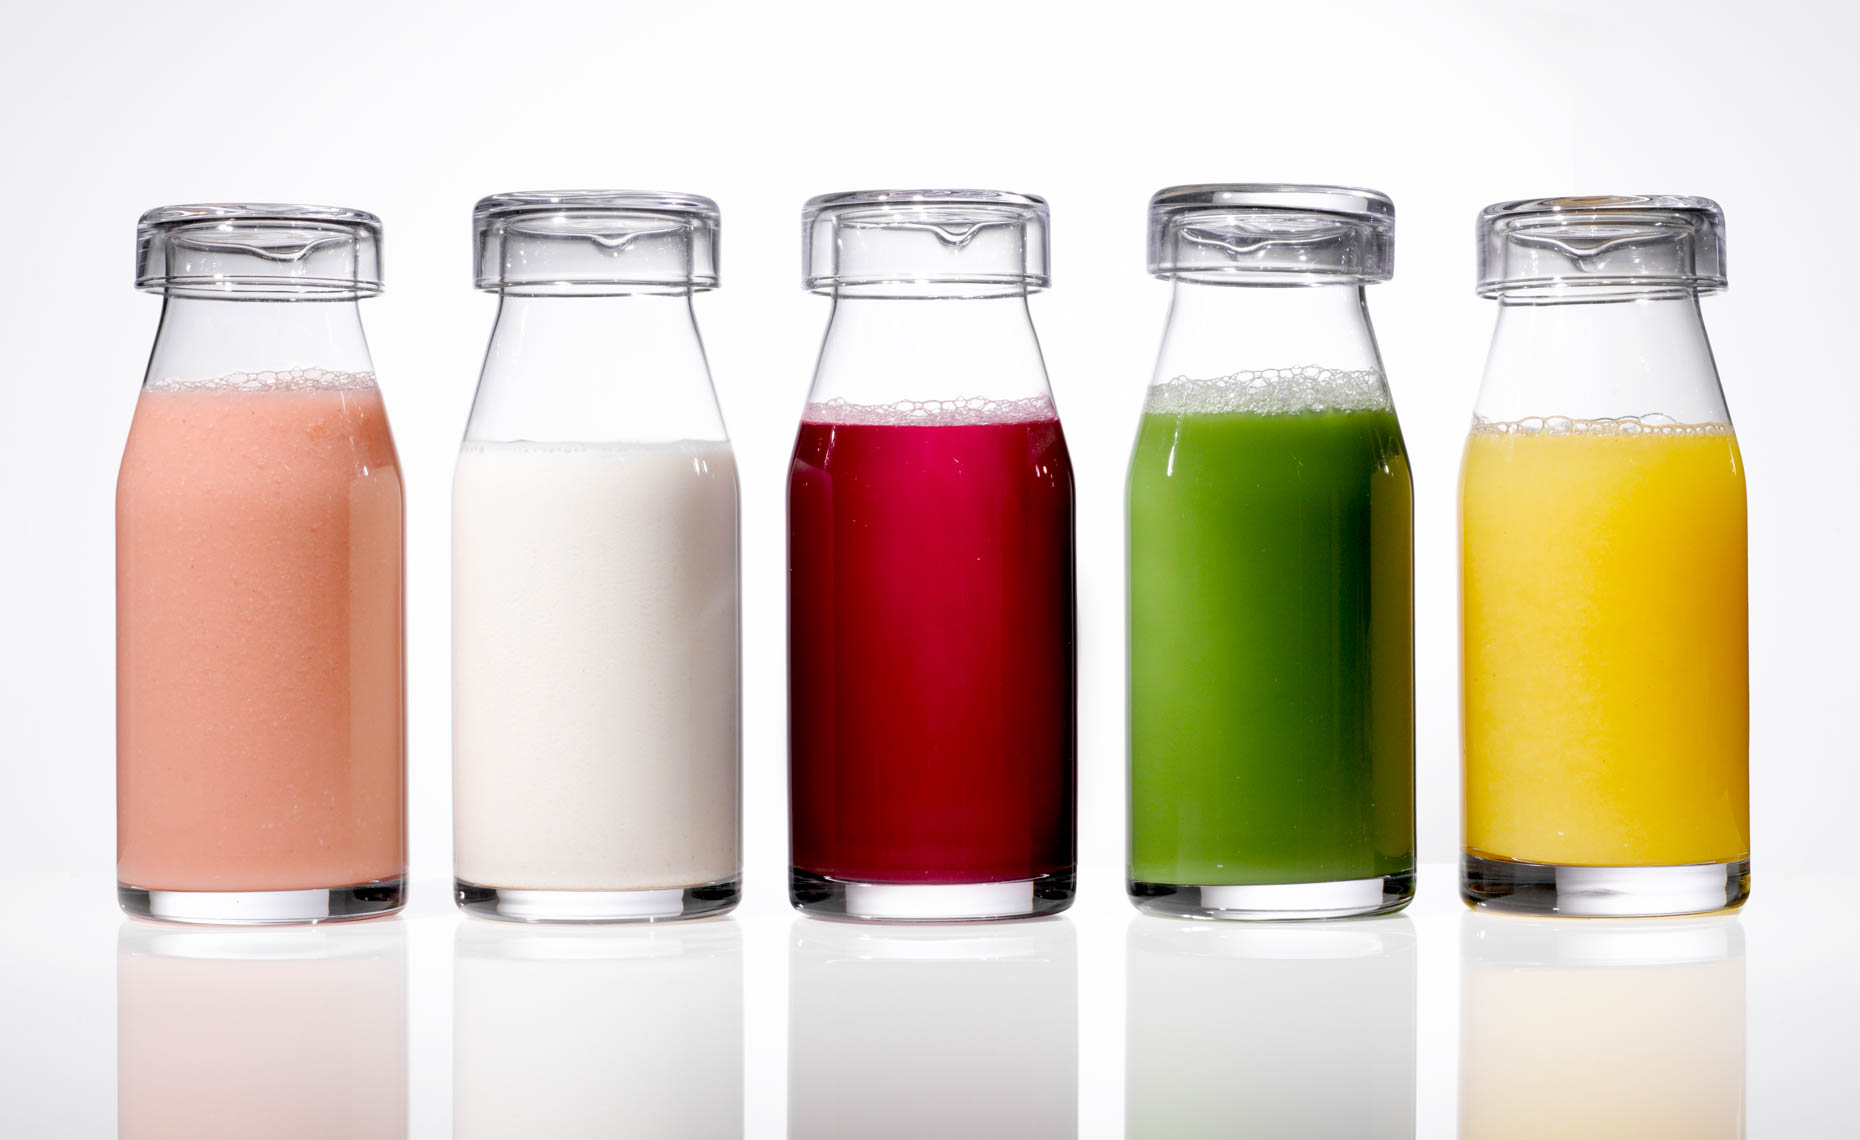 Beverage Still Life, Pressed Juices in Glass Containers